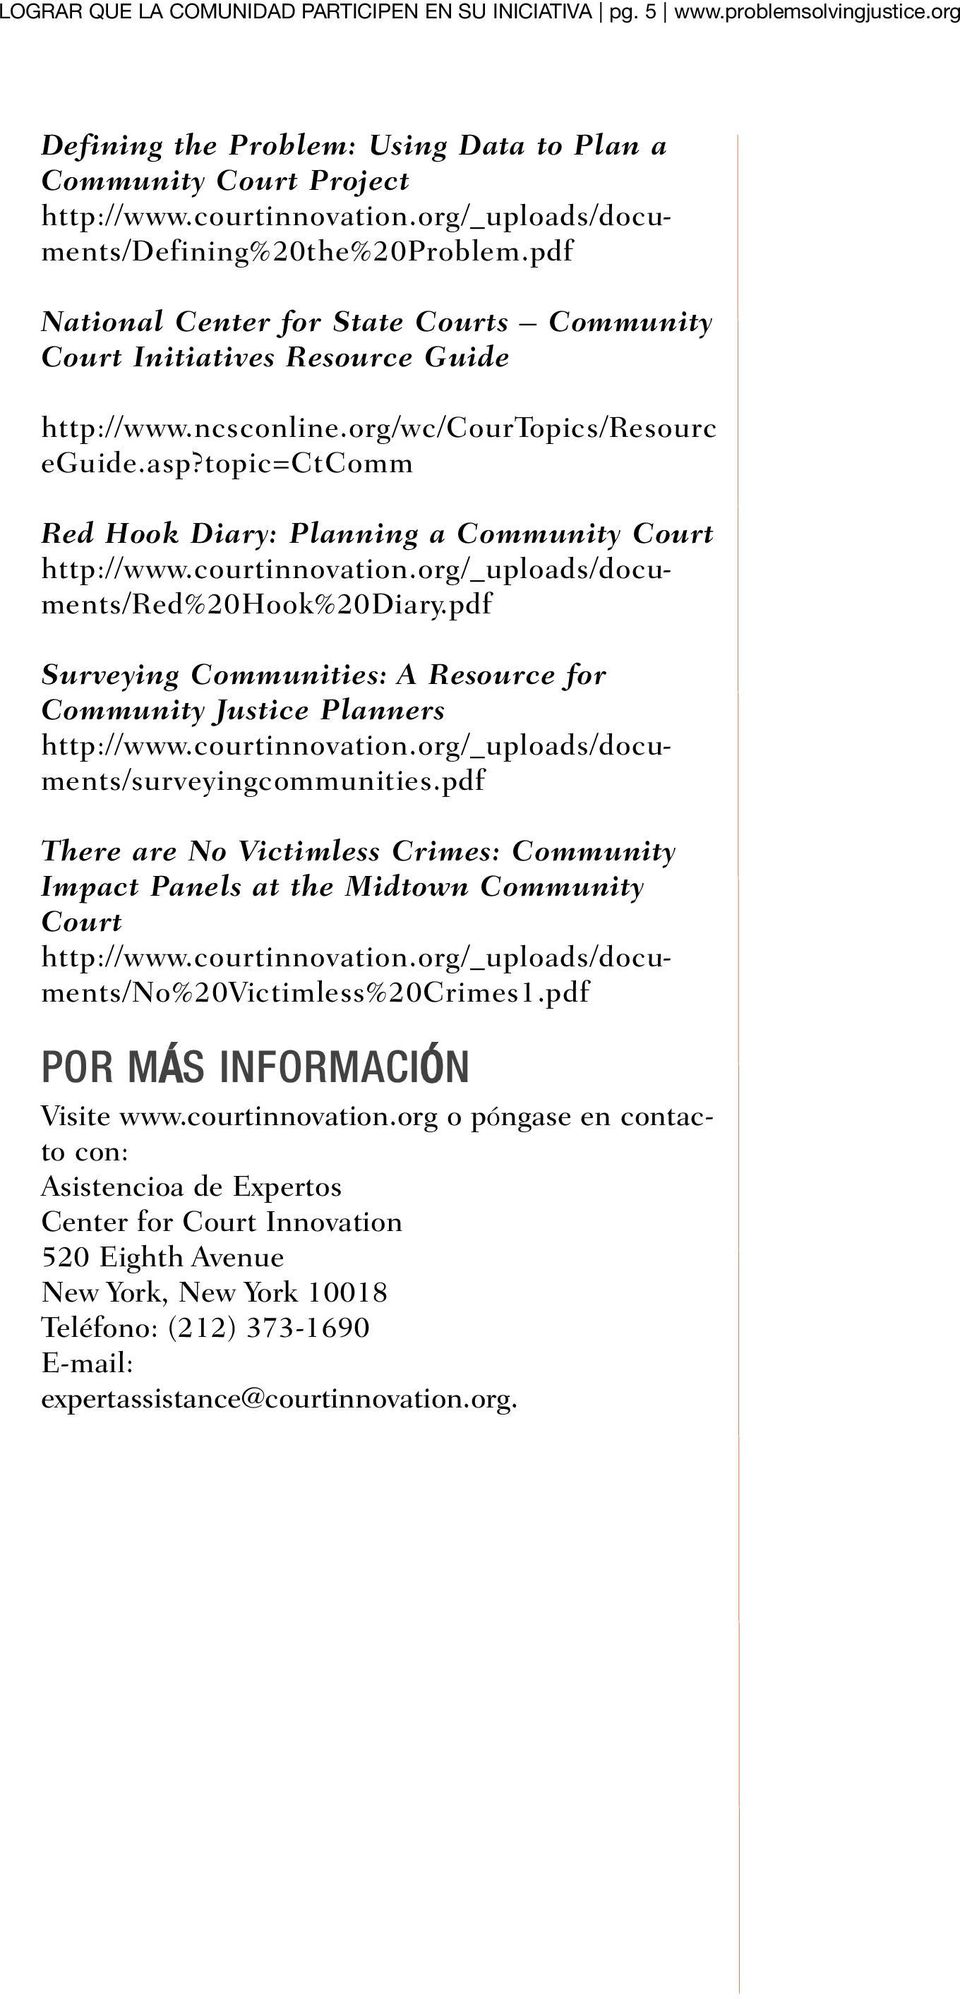 p d f National Center for State Courts Community Court Initiatives Resource Guide h t t p : / / w w w. n c s c o n l i n e. o r g / w c / C o u r To p i c s / R e s o u r c e G u i d e. a s p?